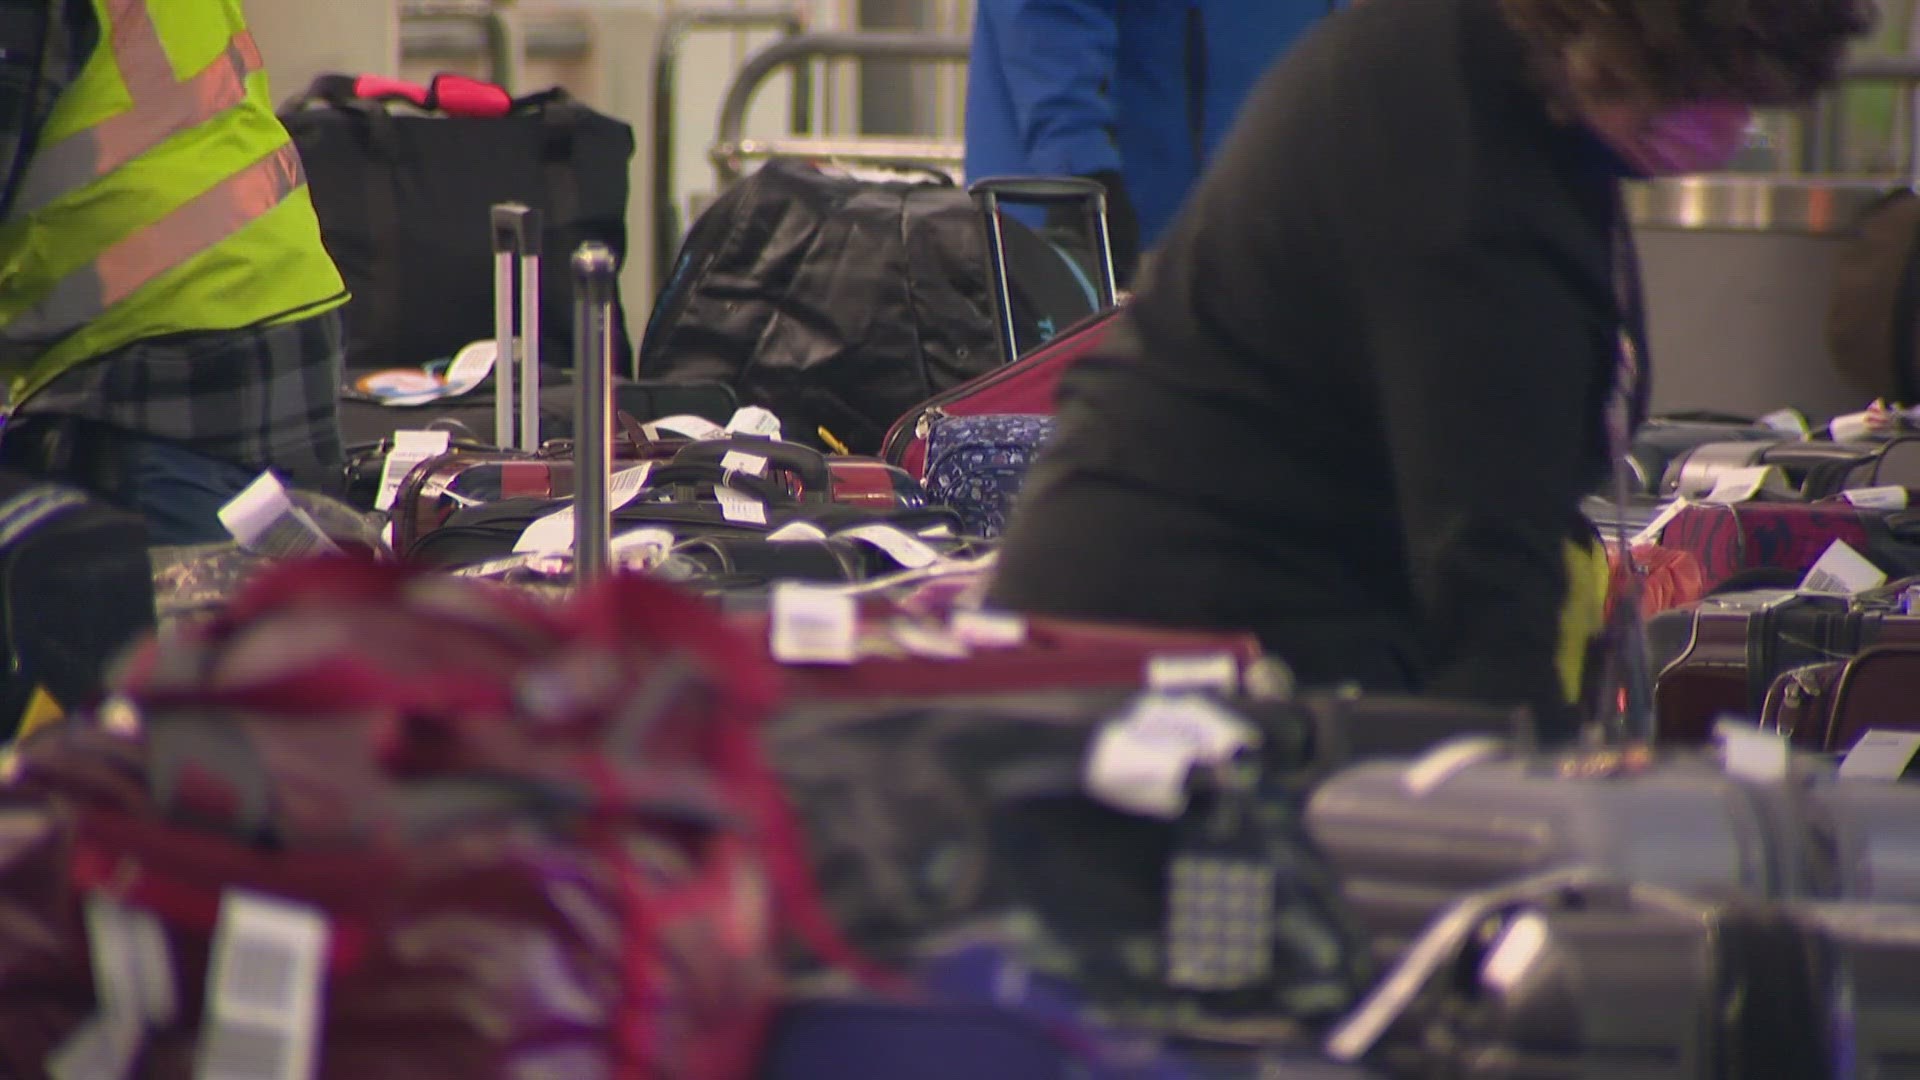 Thousands of bags at DIA is still being sorted. A Colorado woman tracking where hers ended up talks to us about her frustration in getting her luggage back.